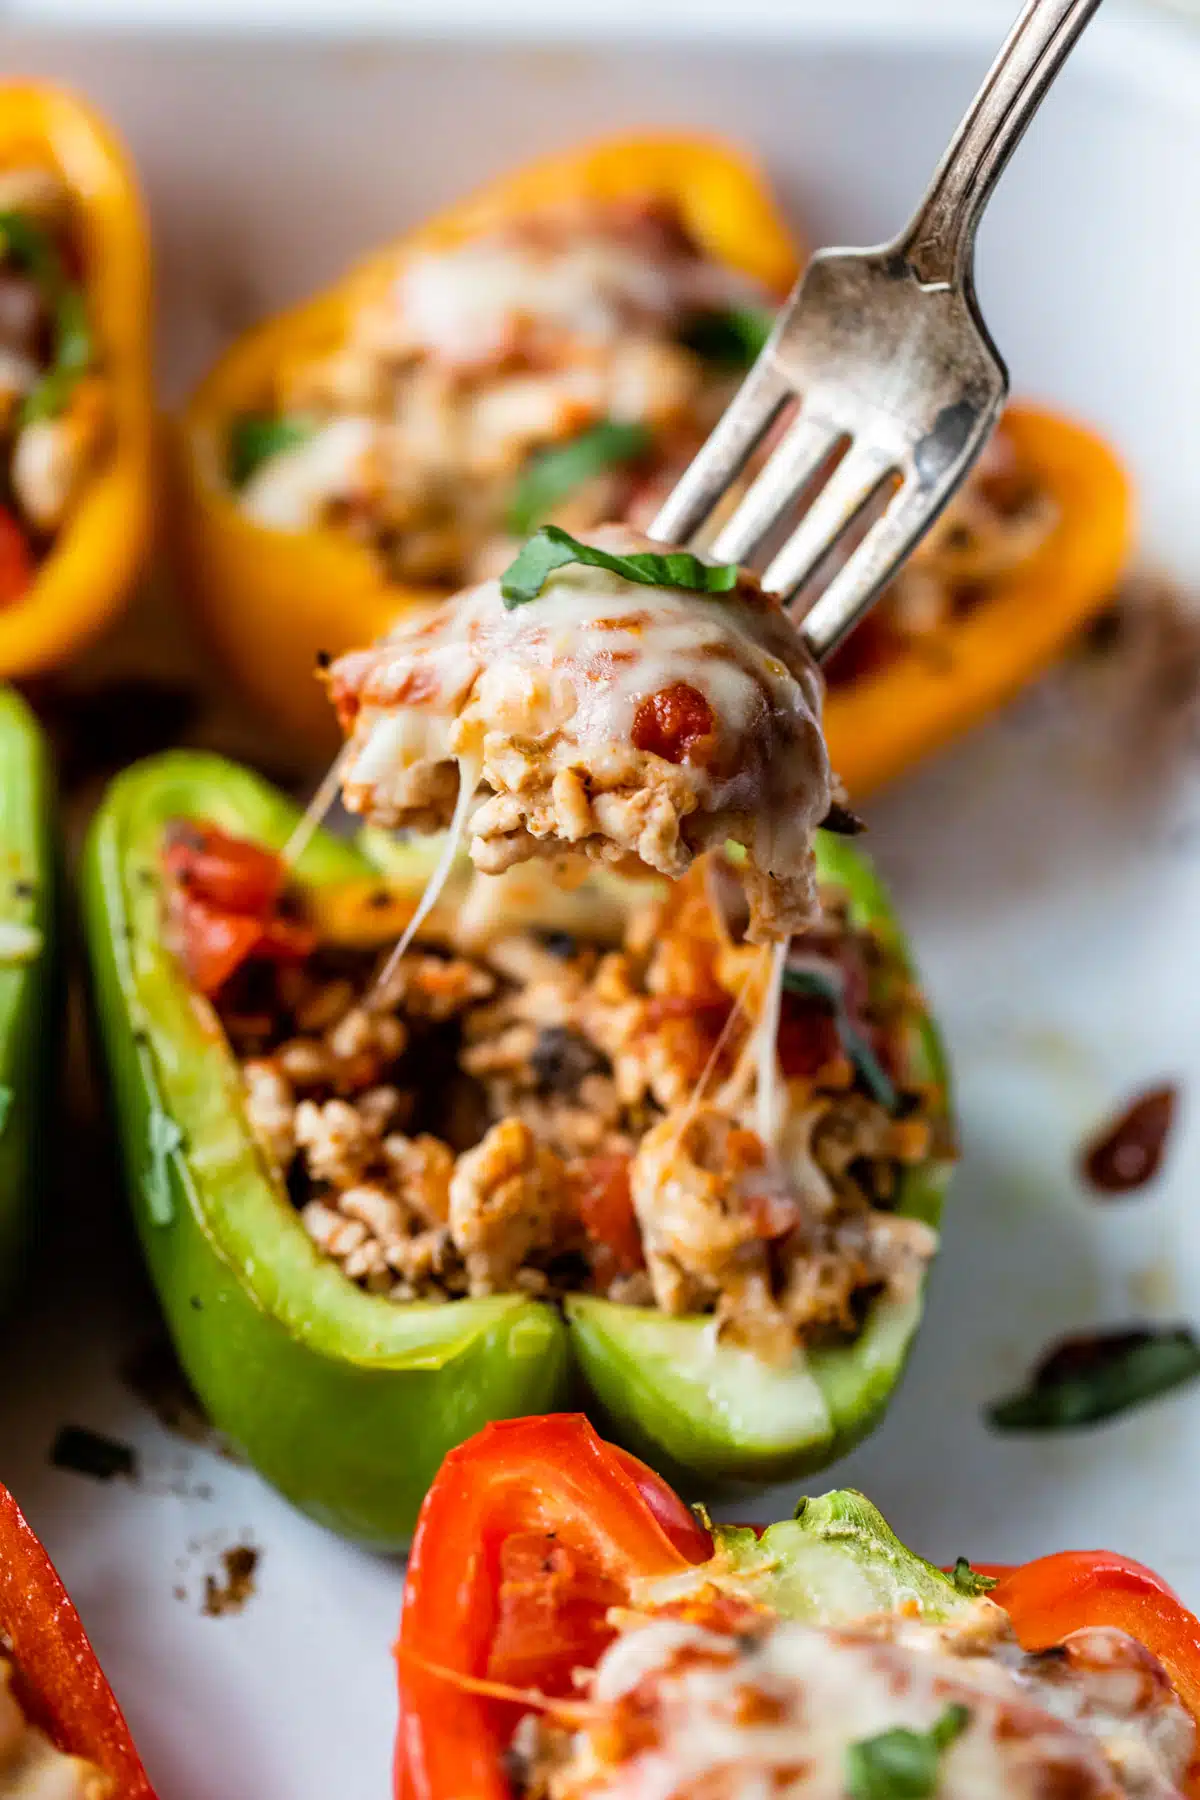 photo of a fork holding a bite of a finished stuffed pepper